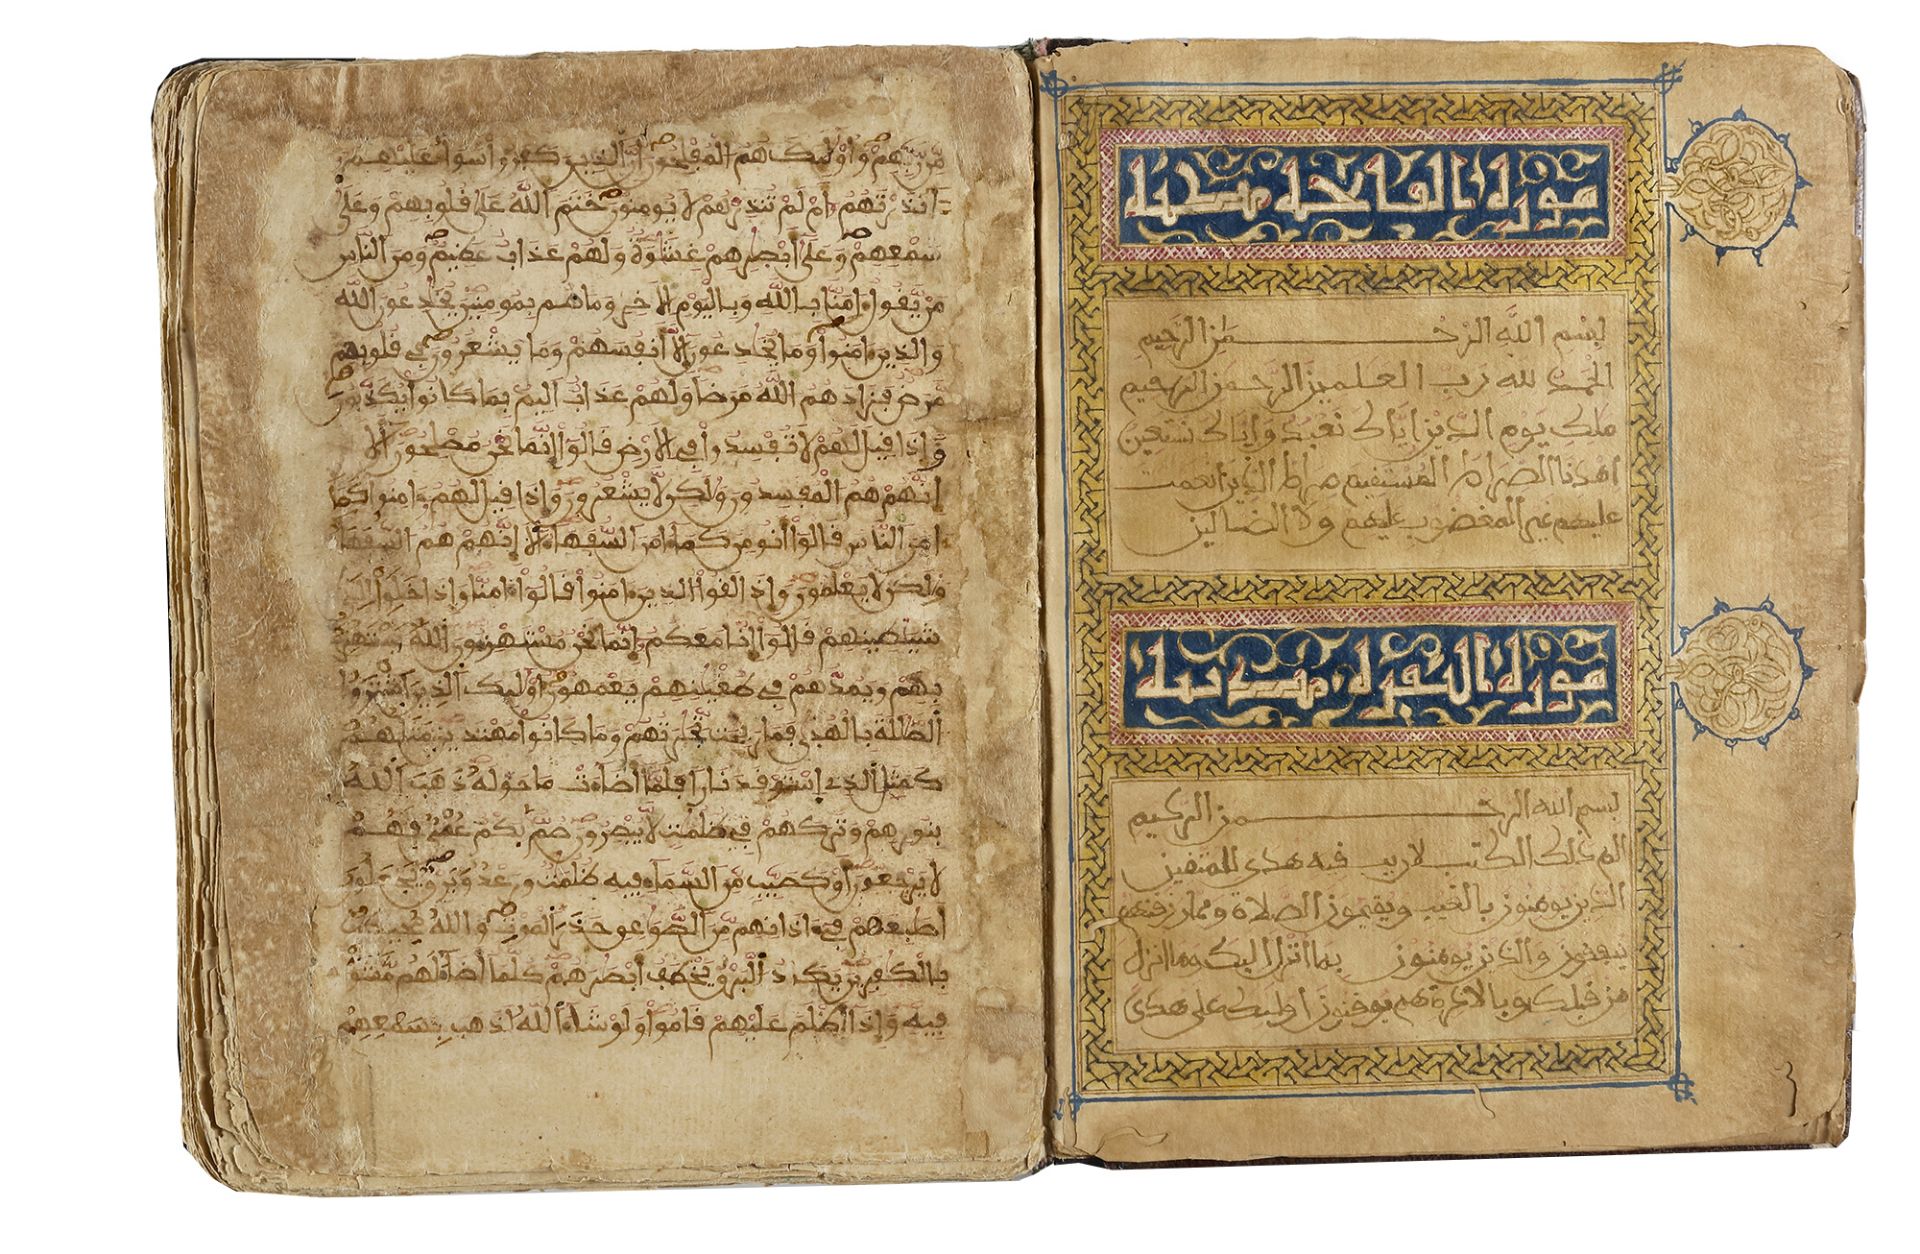 A QURAN IN MAGHRIBI SCRIPT, NORTH AFRICA, DATED 1010 AH/1601 AD - Image 2 of 7